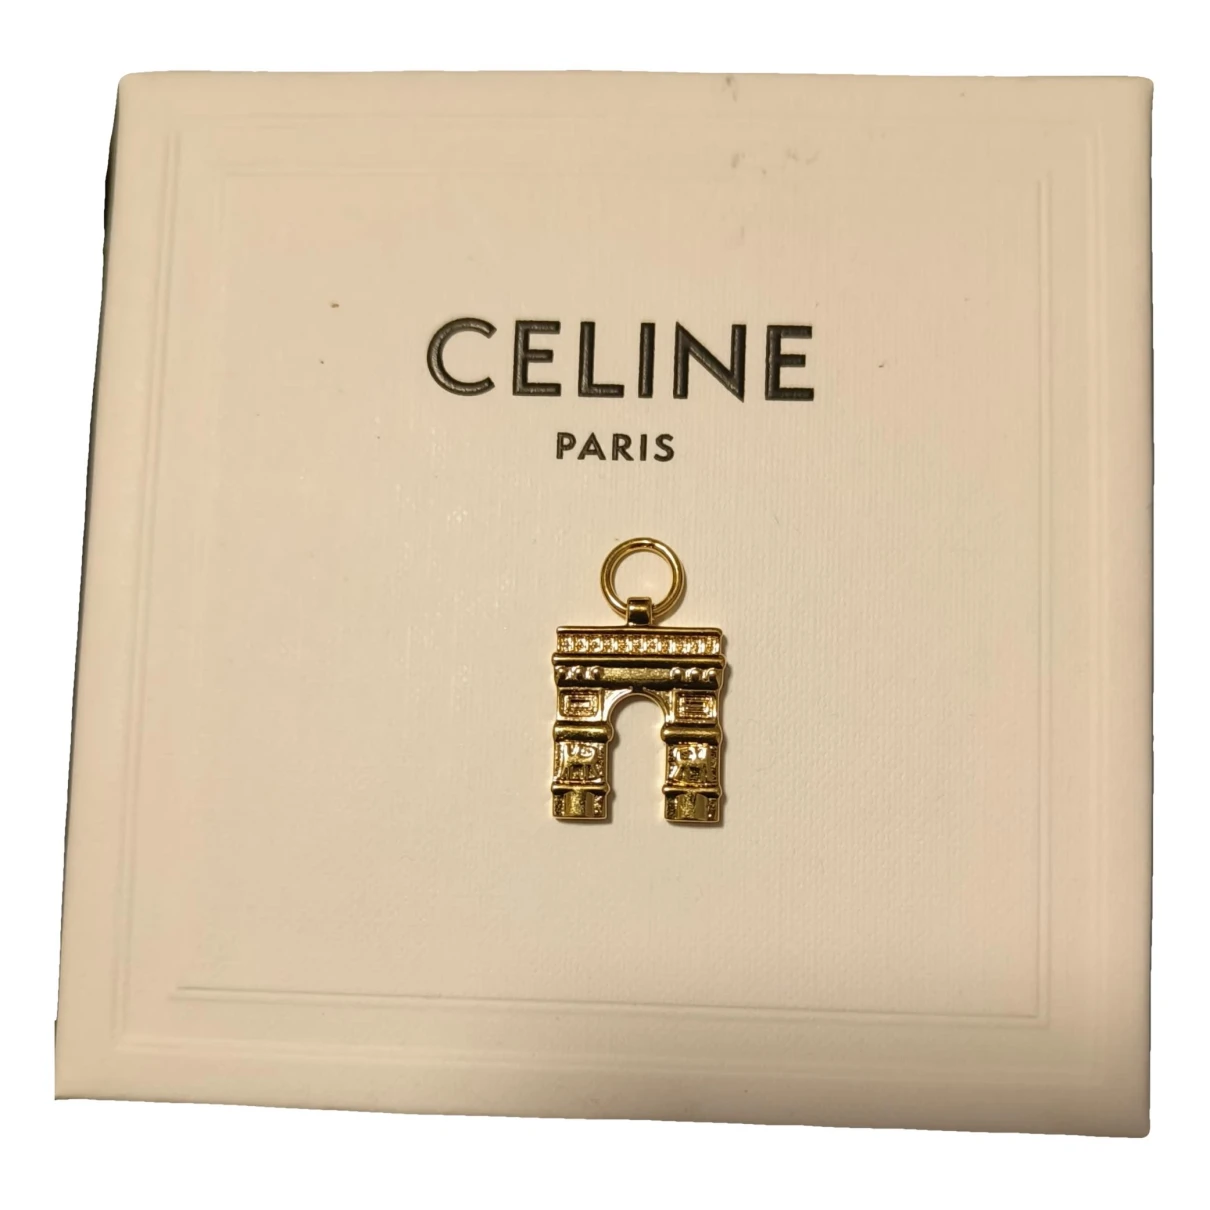 jewellery Celine bag charms for Female Other. Used condition